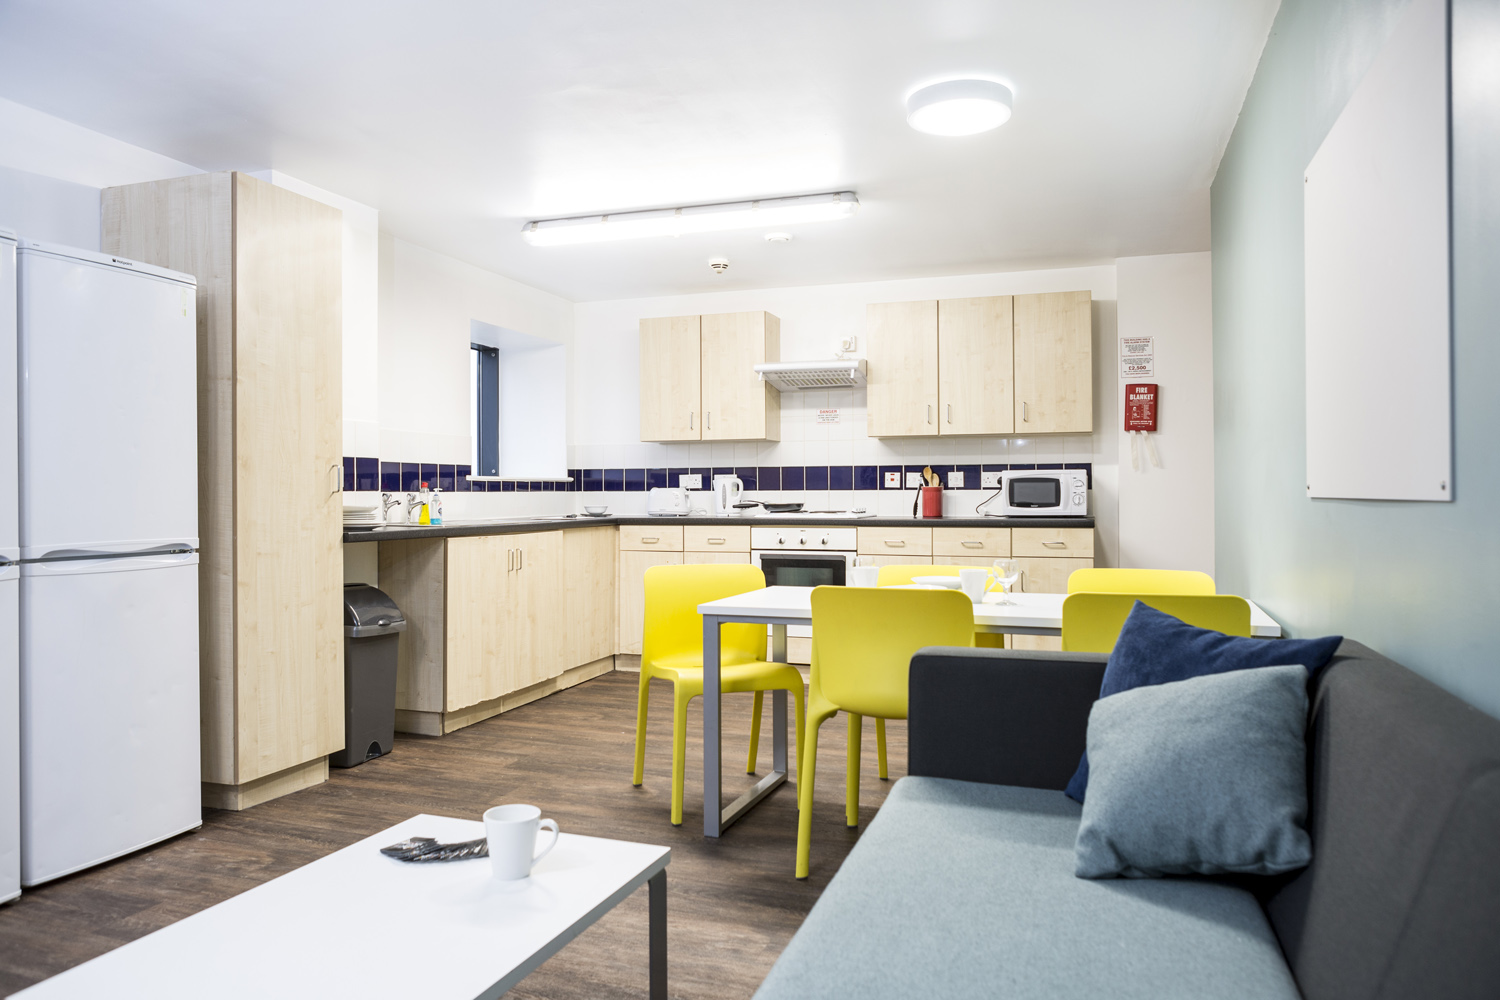 Living space at Arena Village, dark blue sofas in the foreground with brightly coloured chairs at the kitchen table